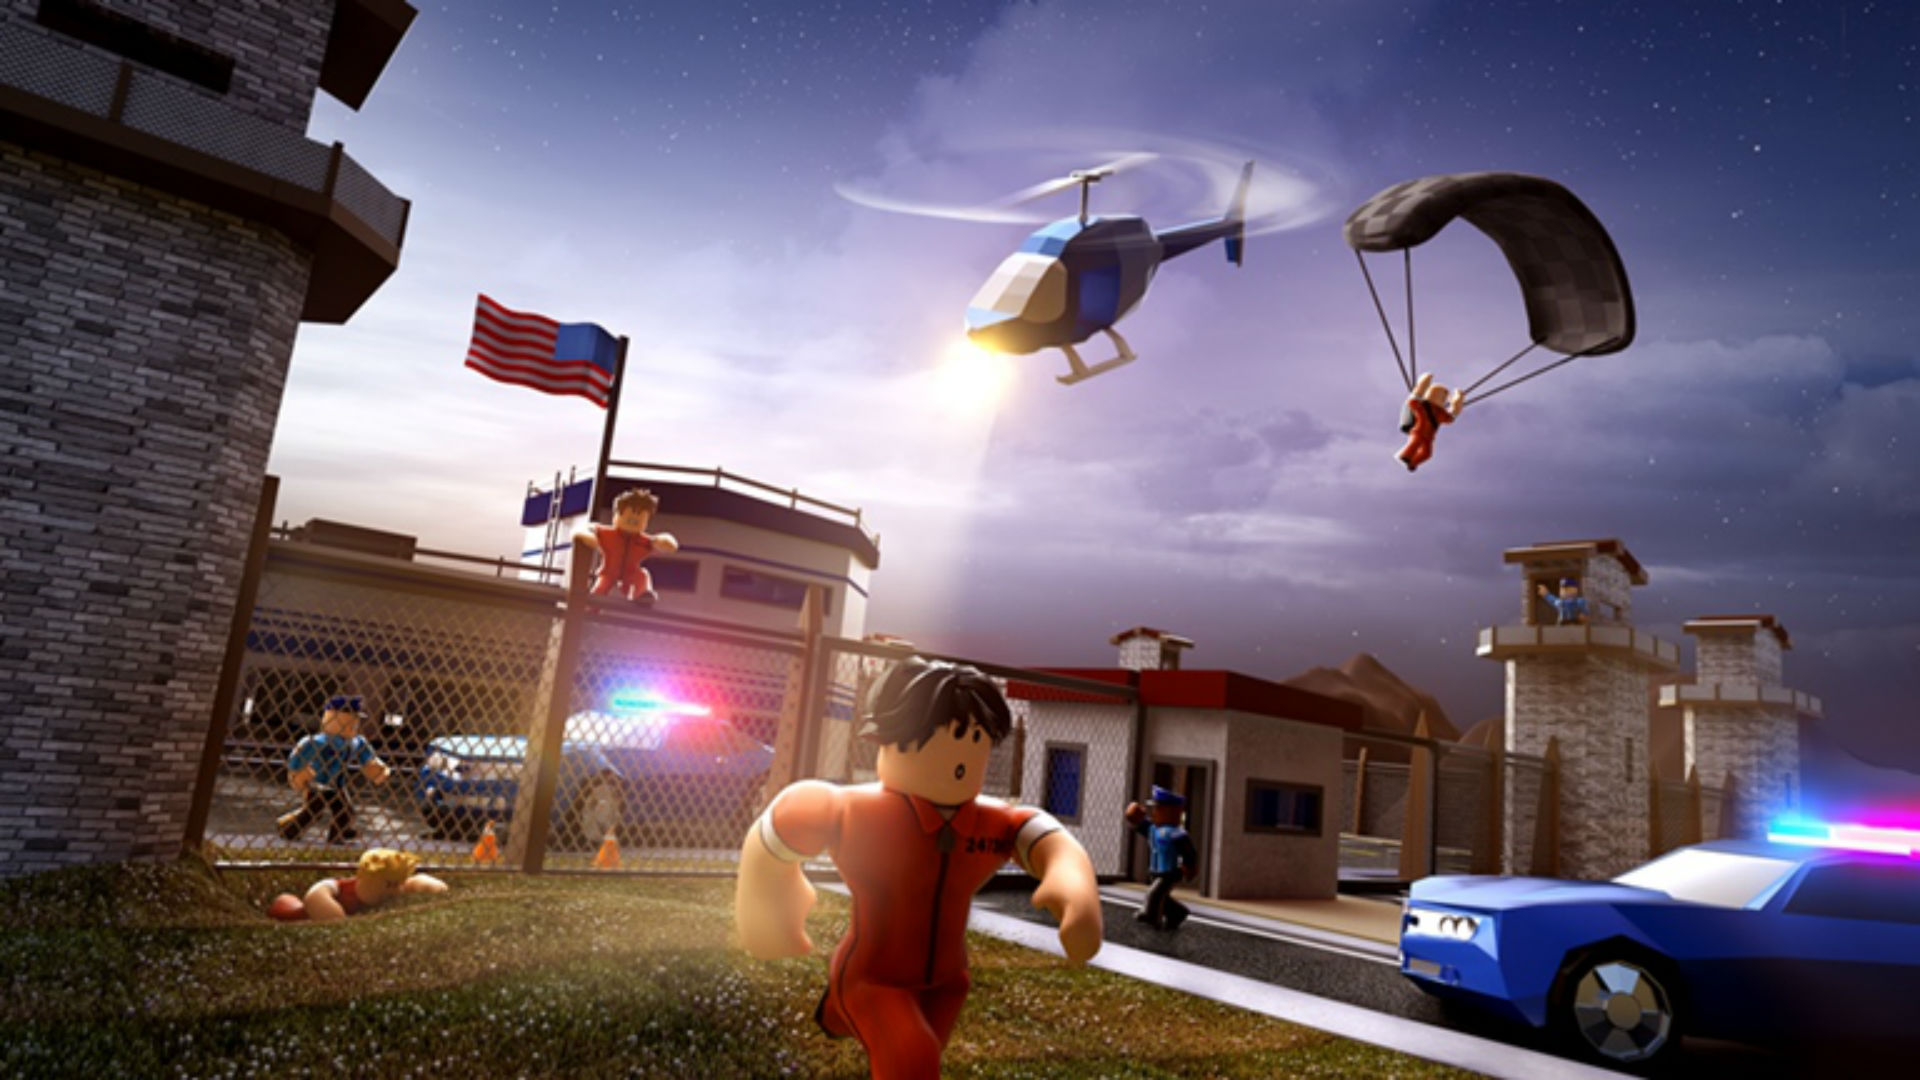 Roblox hits 100 million active monthly users